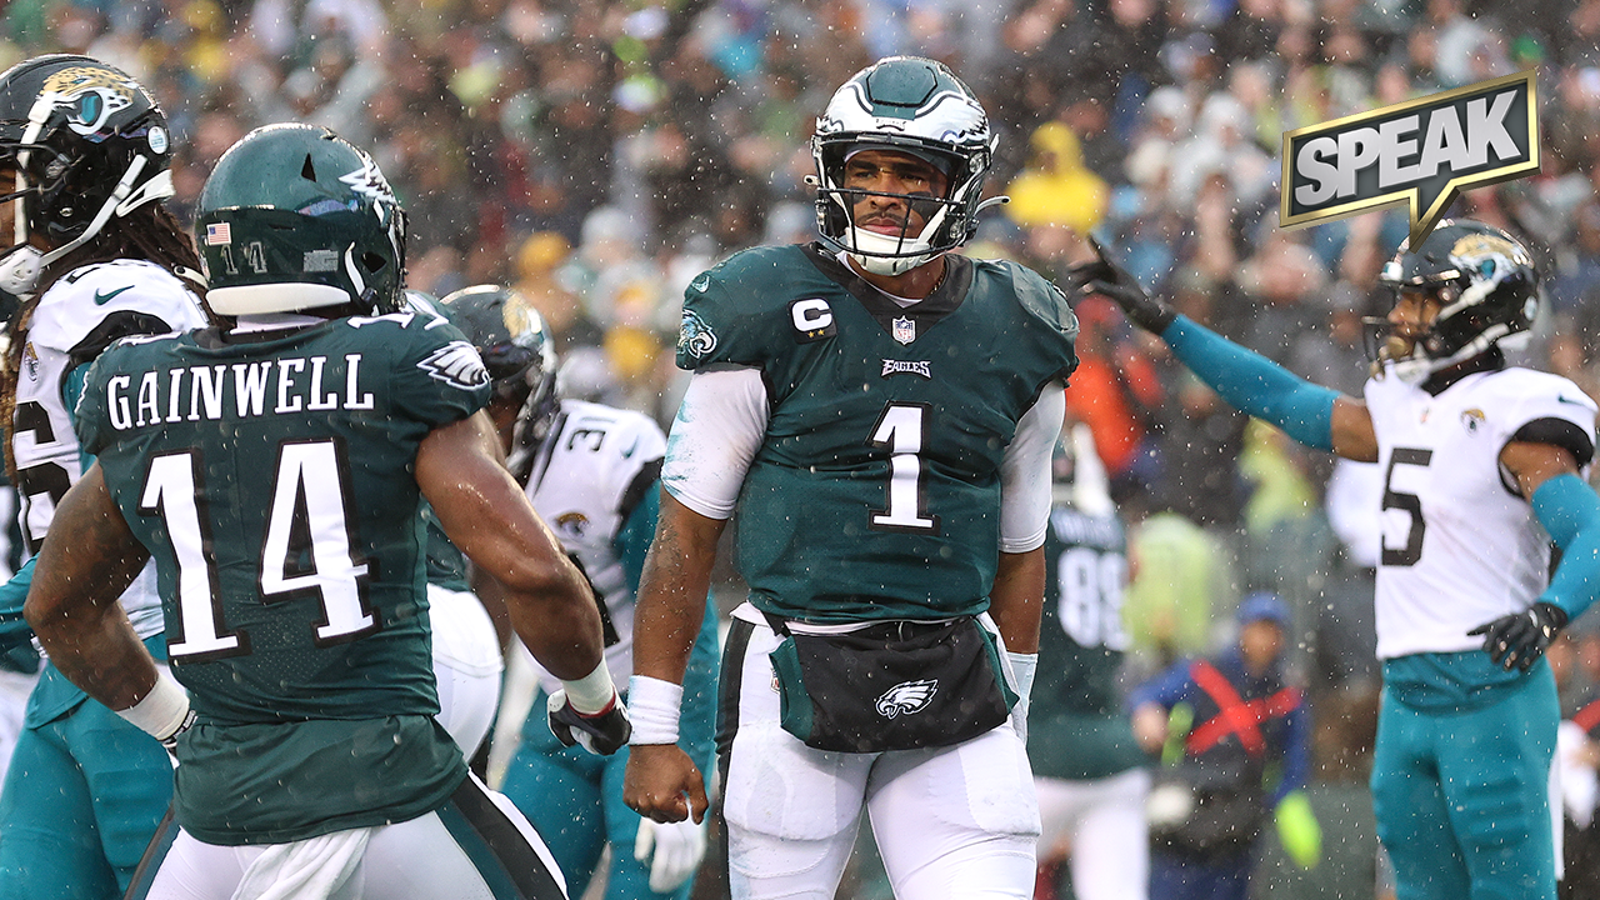 Have the Eagles been the most impressive team to start the season?